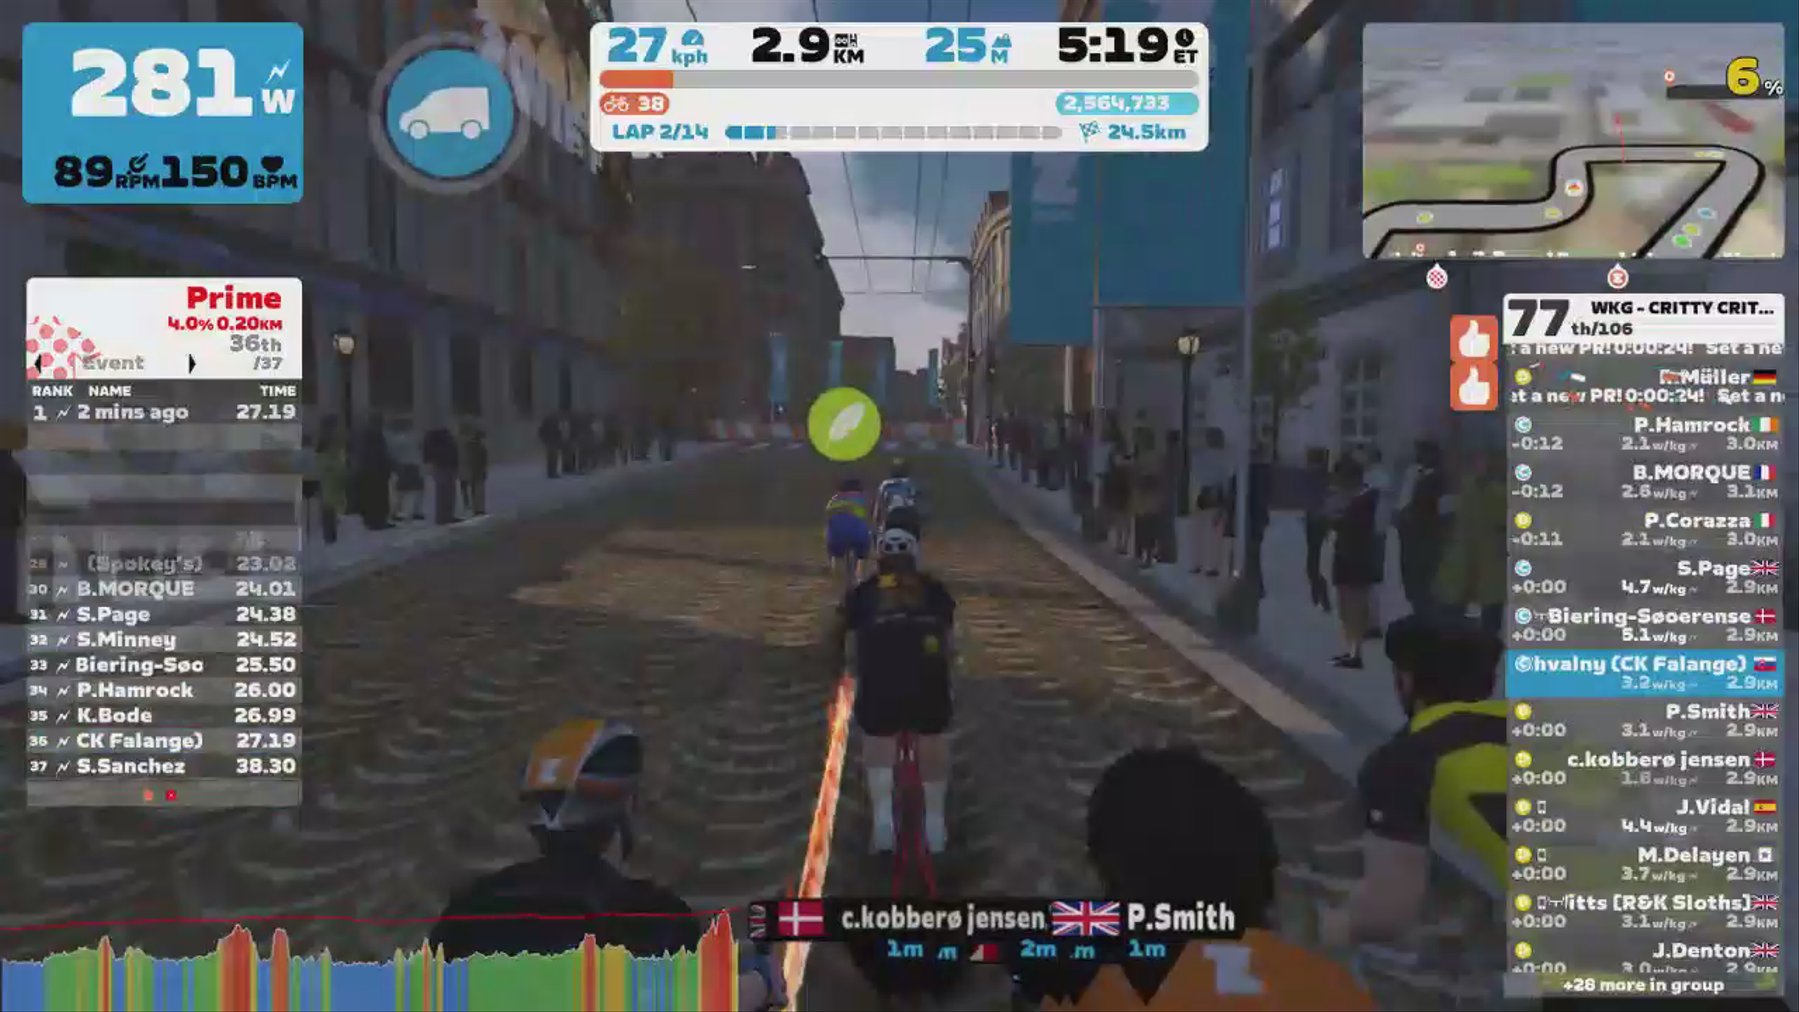 Zwift - Race: WKG - CRITTY CRITTY BANG BANG (C) on Downtown Dolphin in Crit City